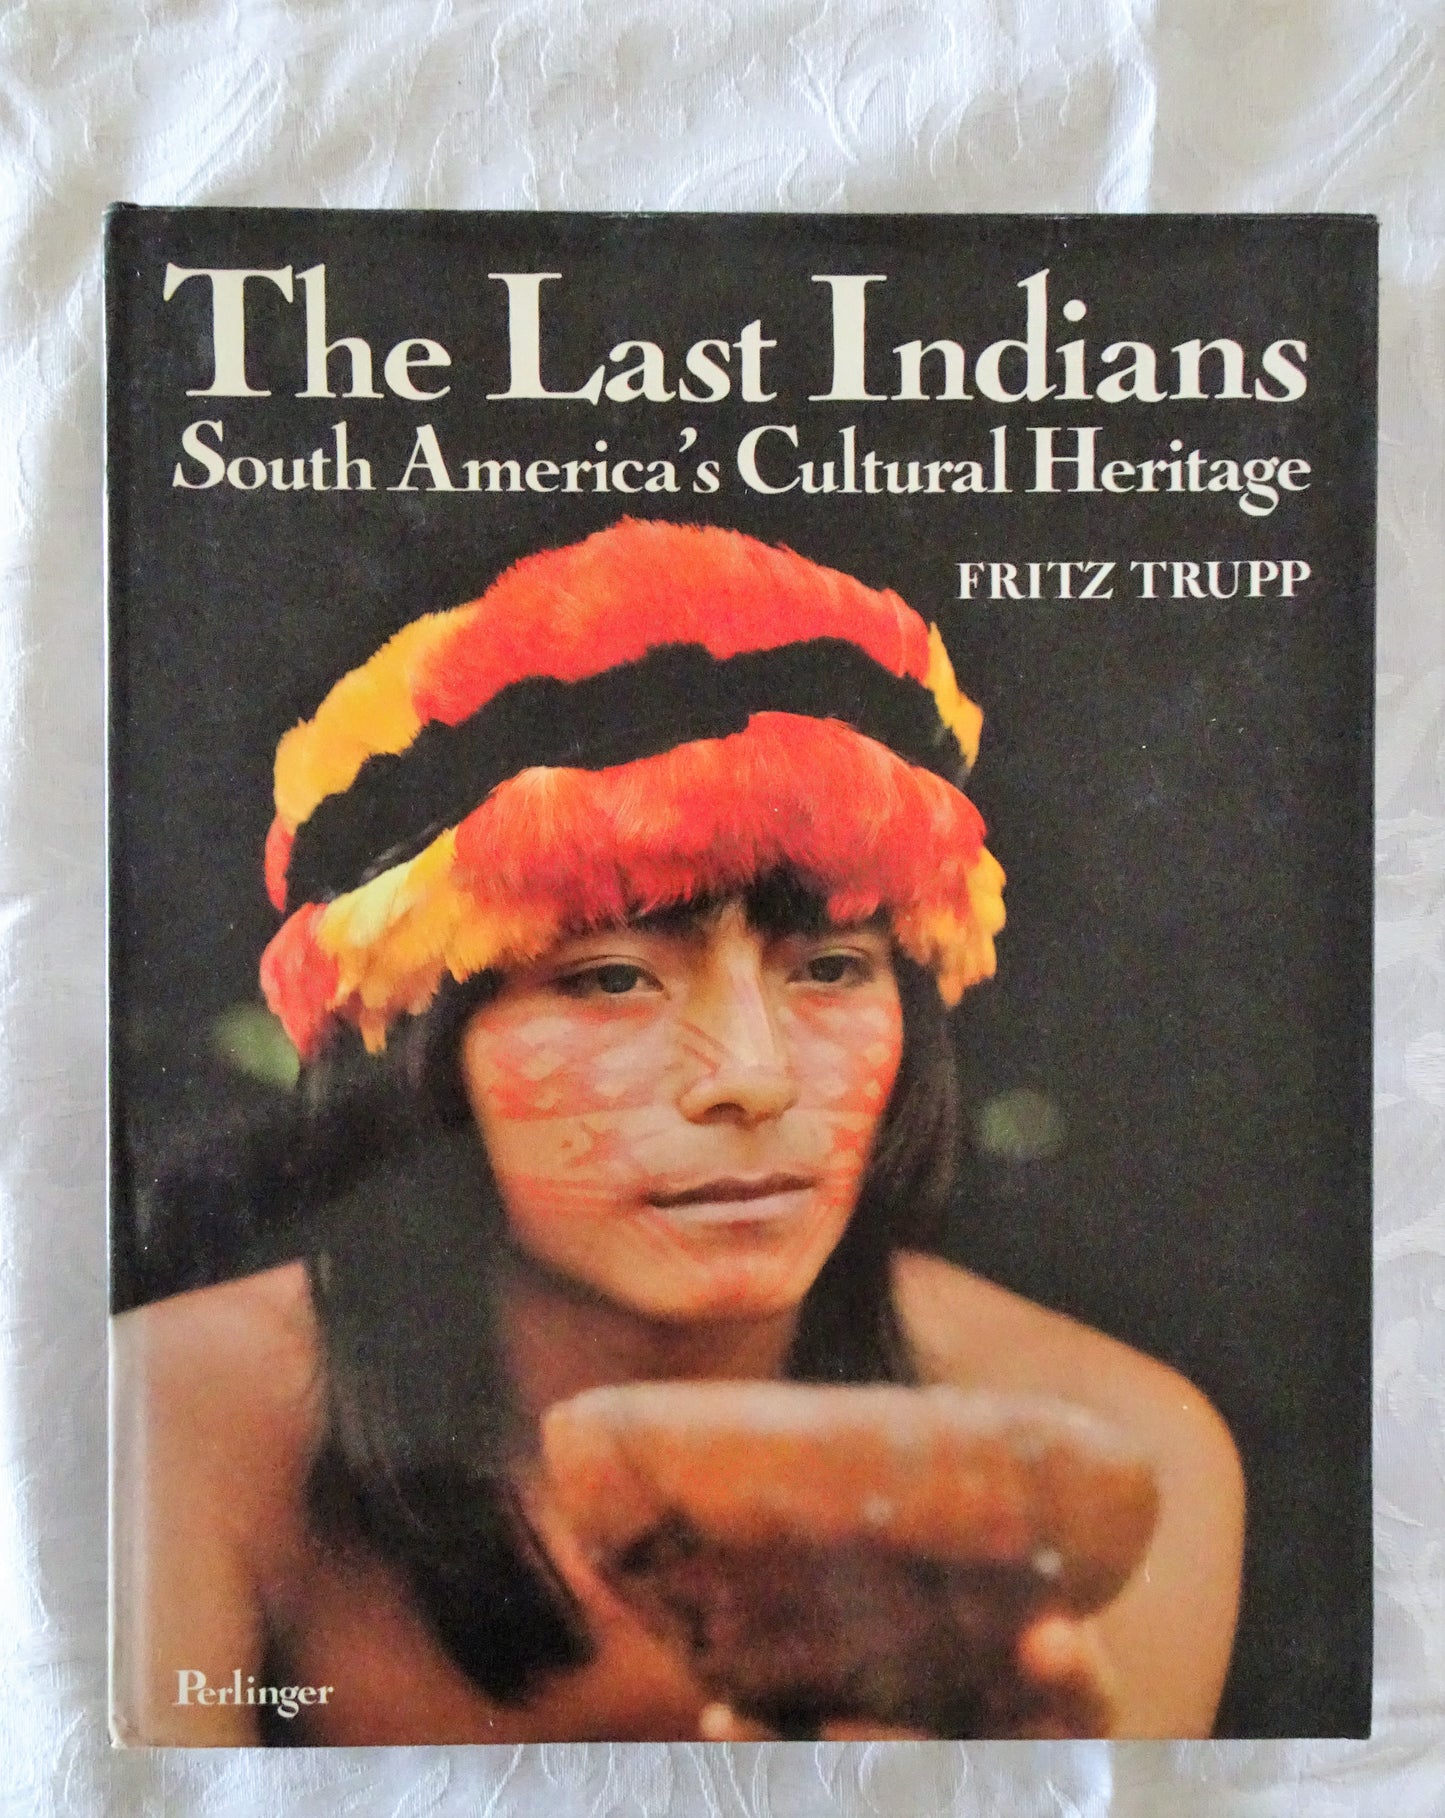 The Last Indians  South America's Cultural Heritage  by Fritz Trupp